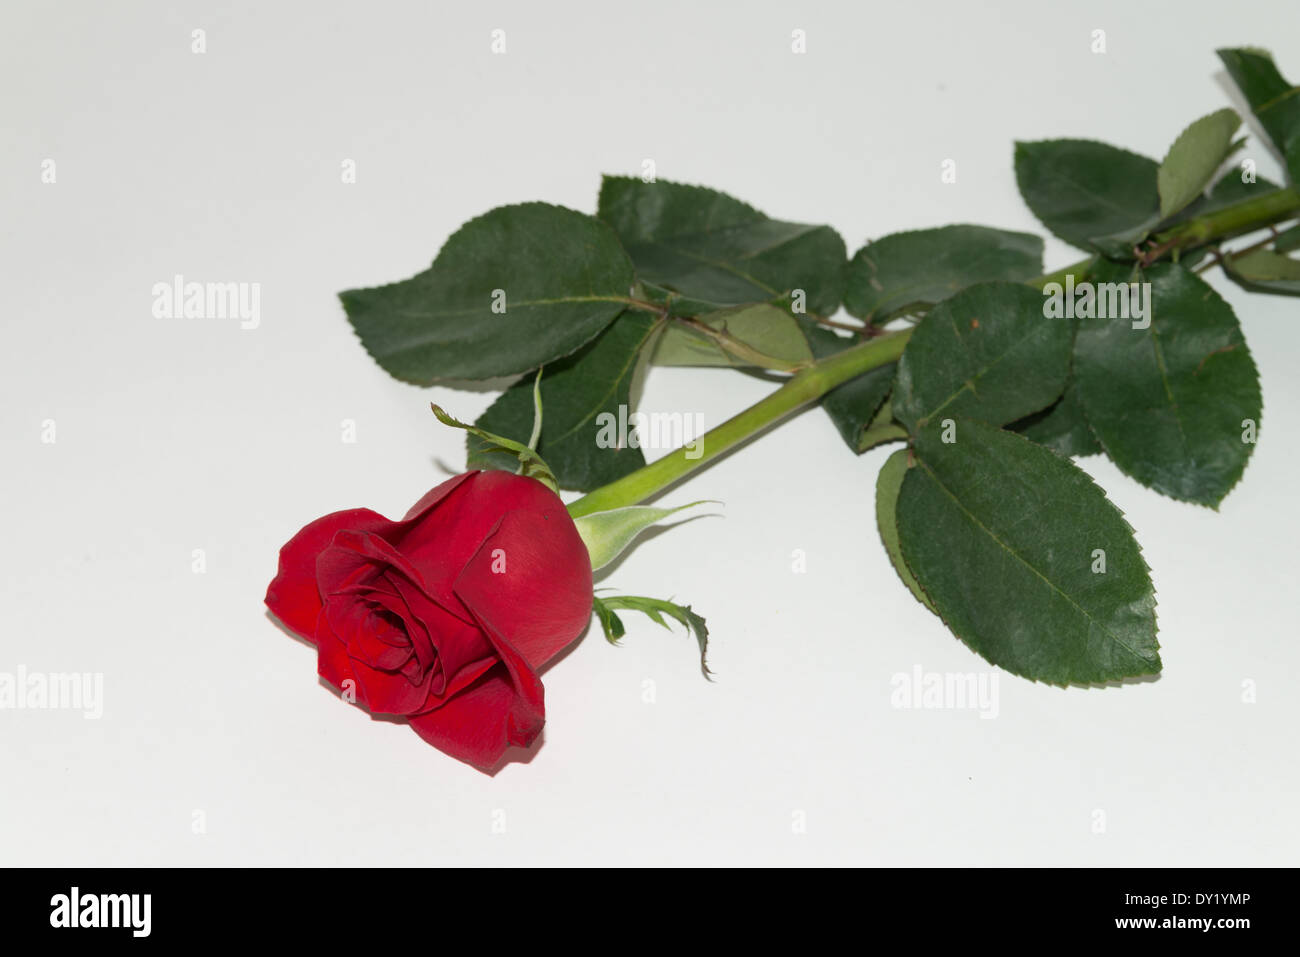 garden flower red rose on a white background Stock Photo